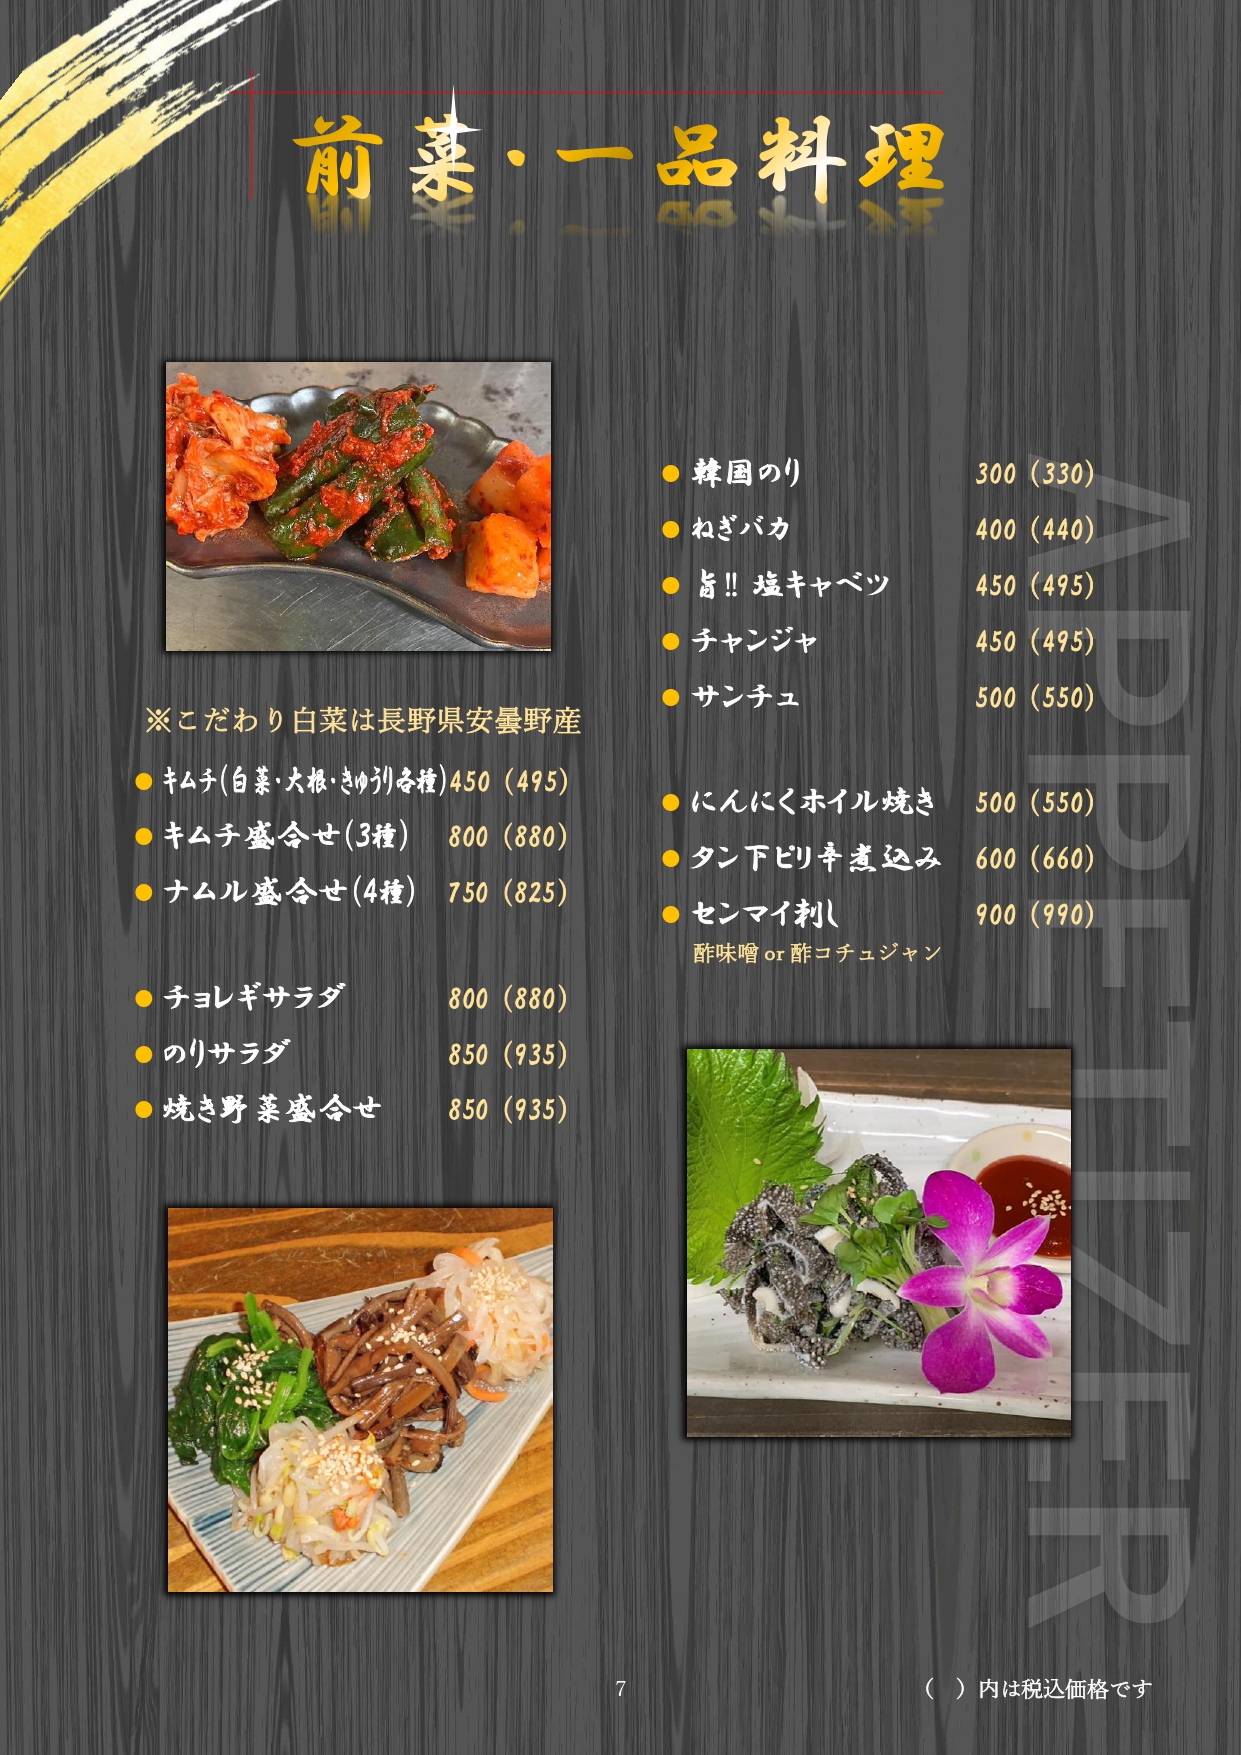 Images 石垣牛焼肉専門店まる本店